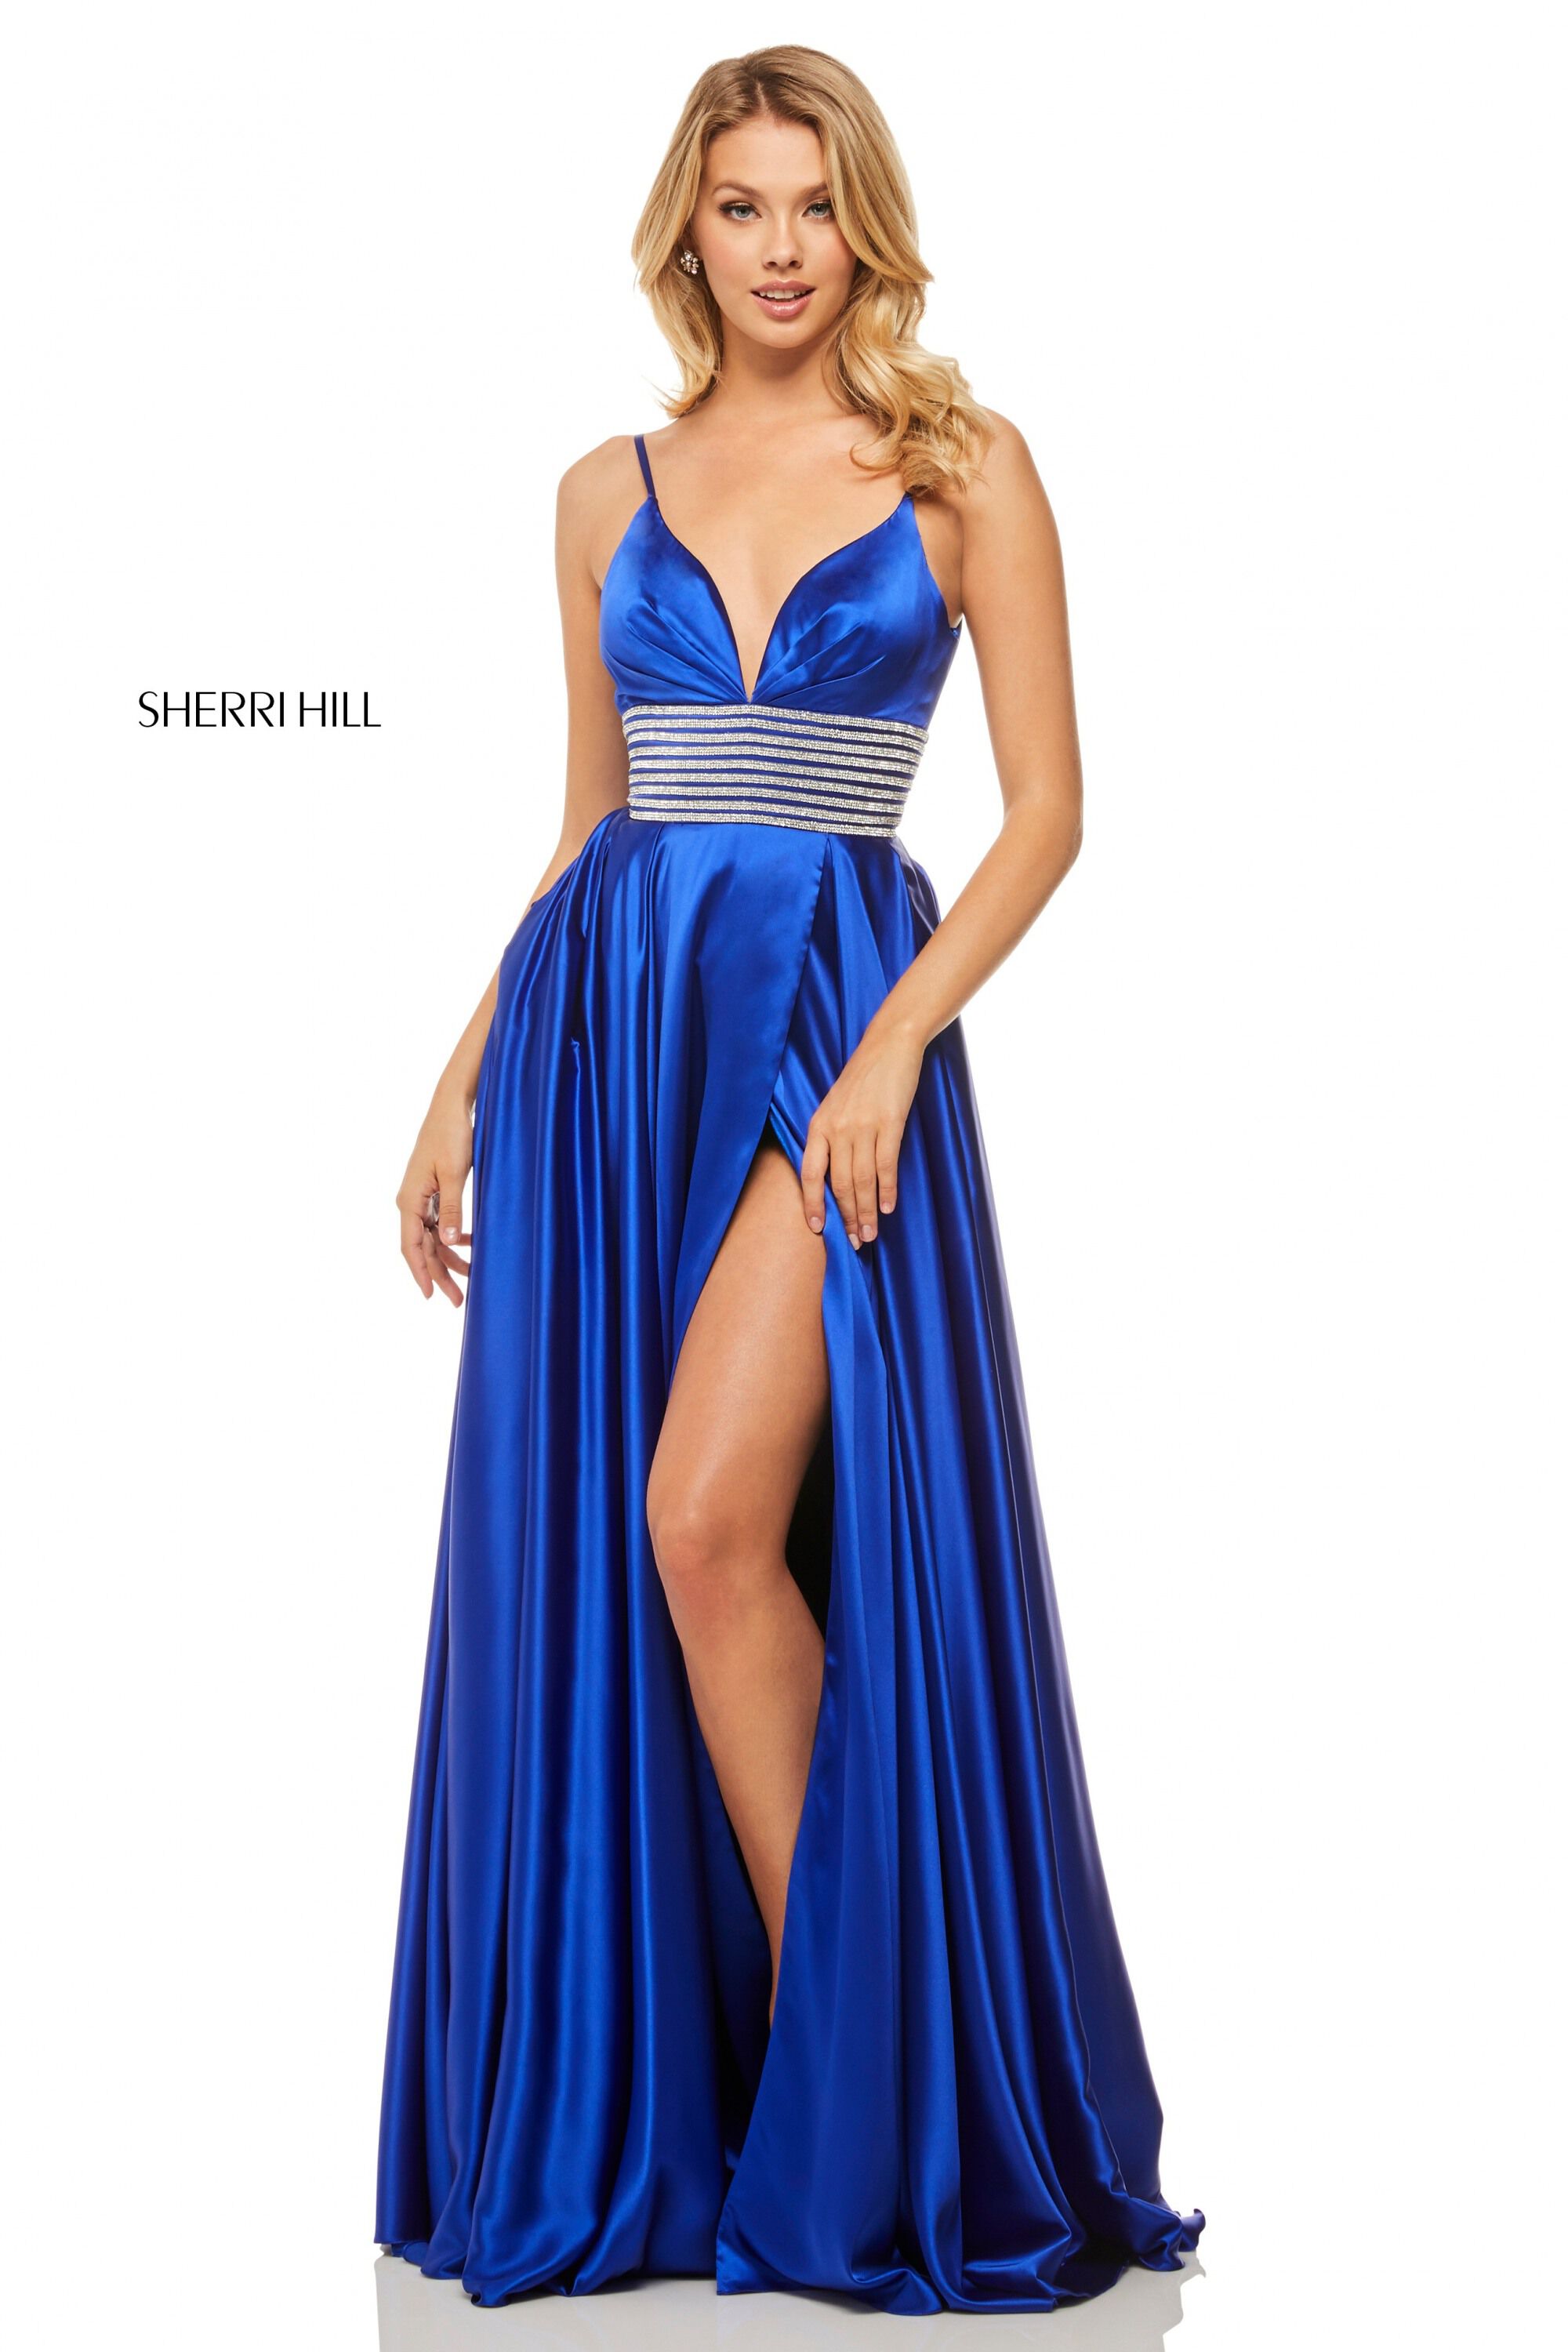 style № 52906 designed by SherriHill